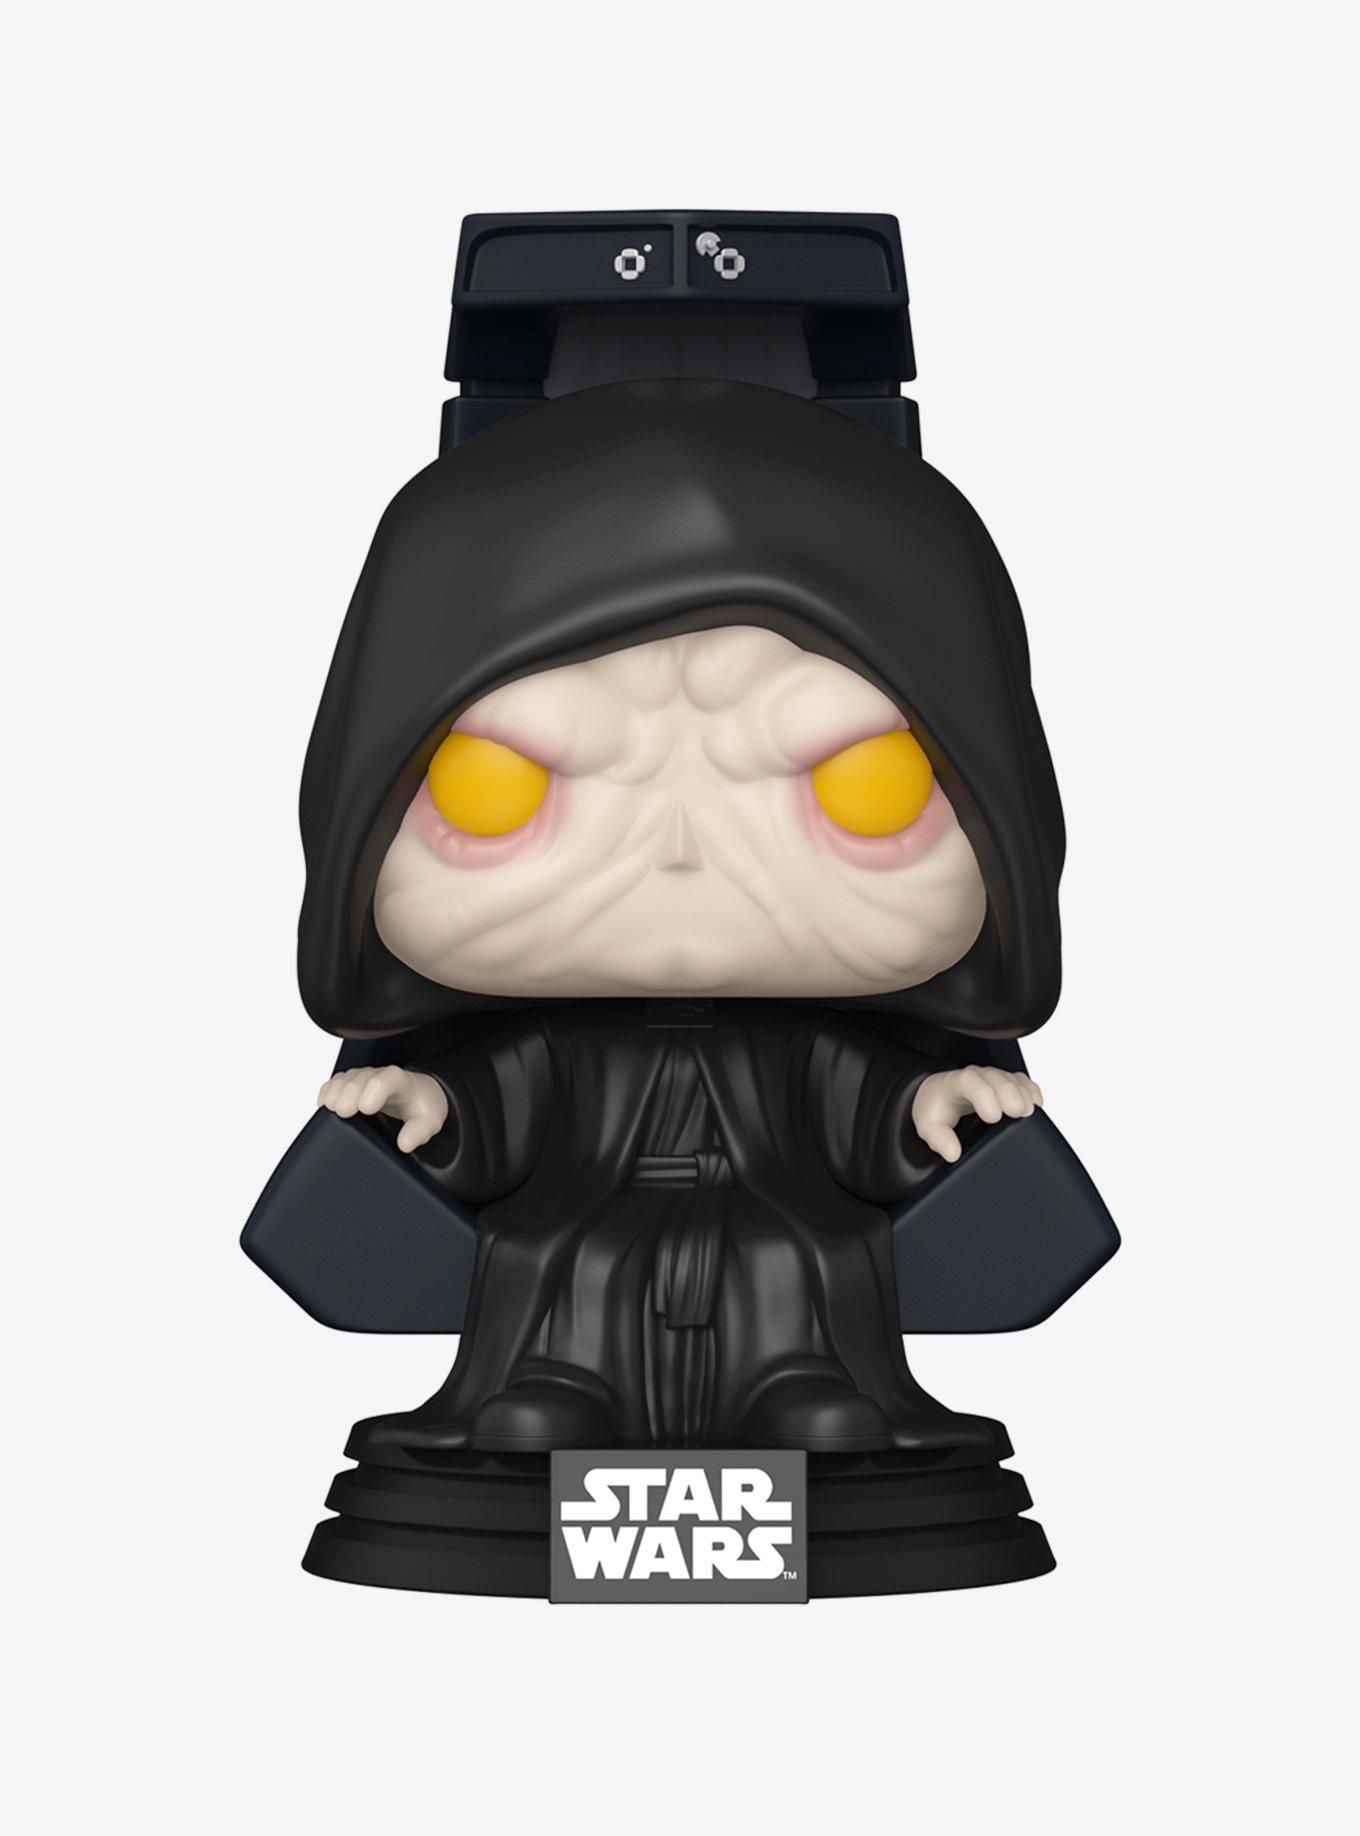 Wish Funko Pop! and Plush Collectibles Now Available for Pre-Order